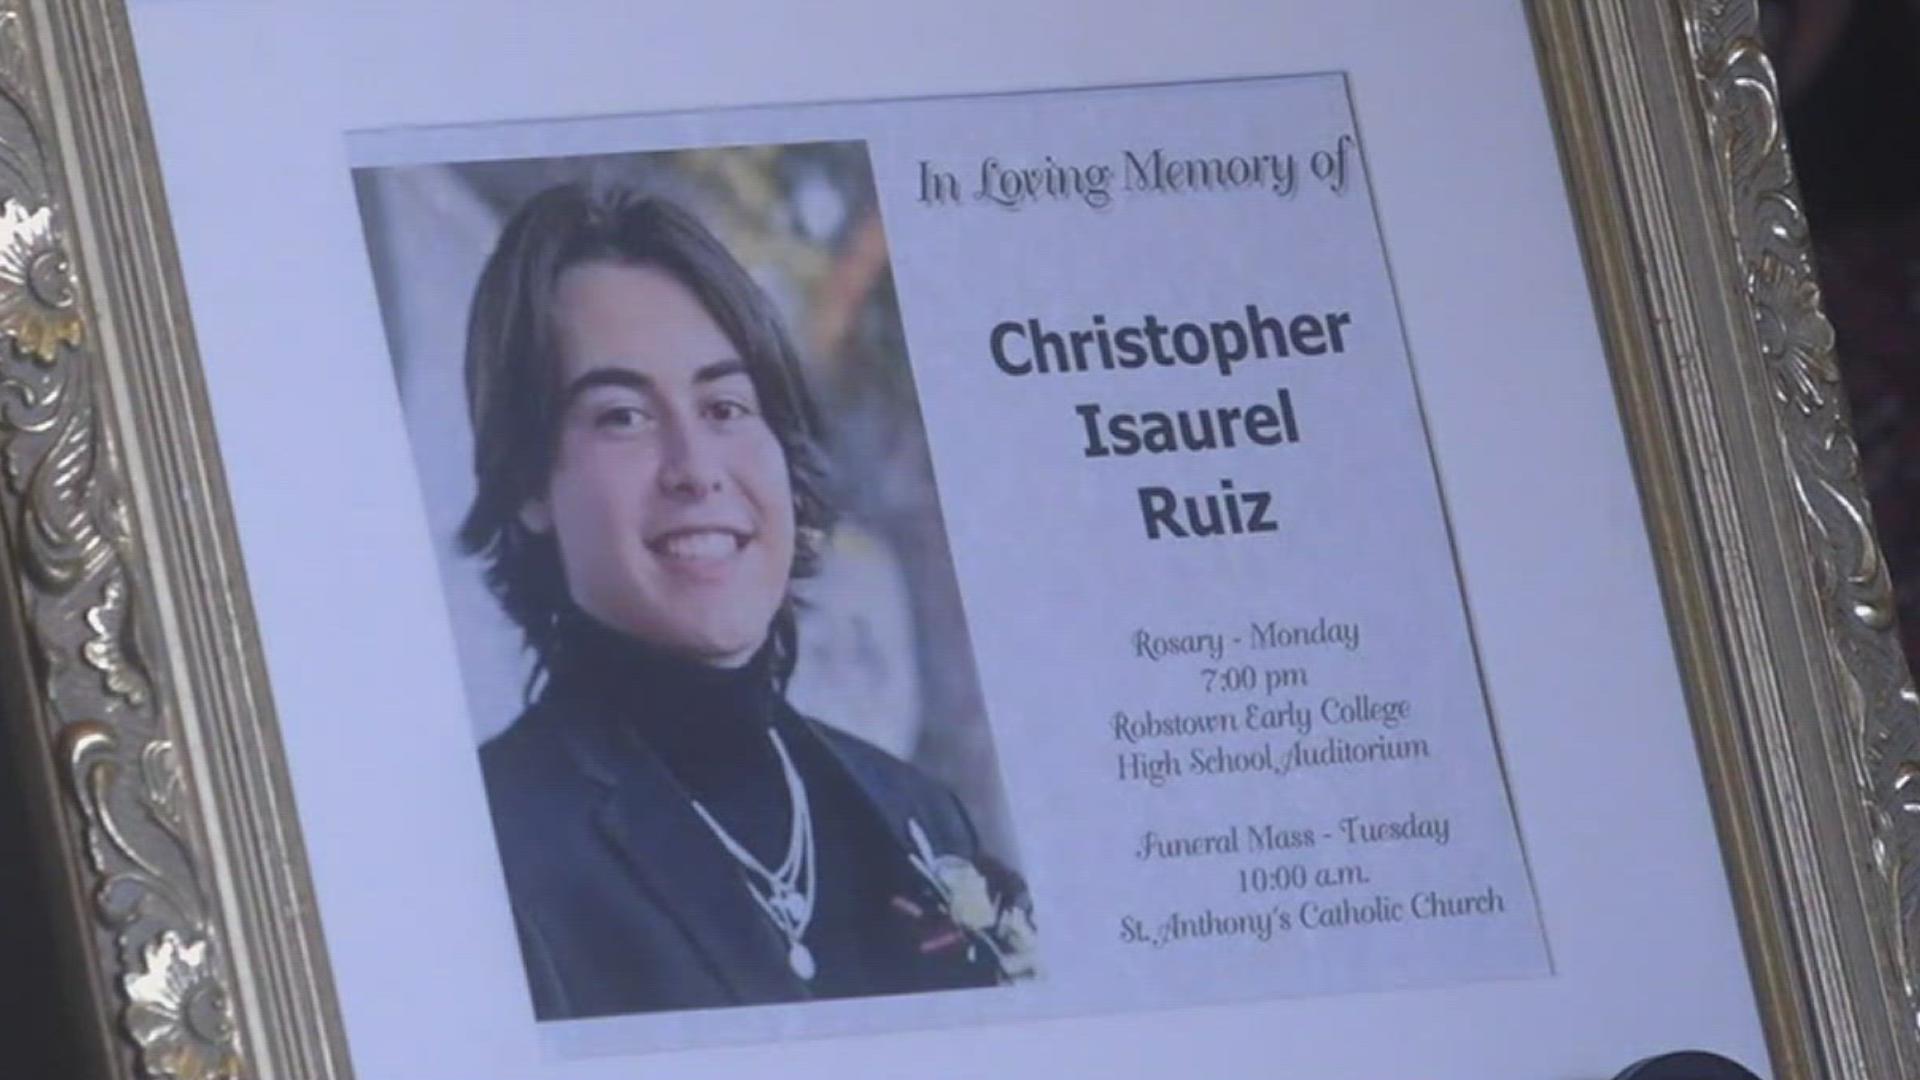 Hundreds gathered at St. Anthony's Catholic Church in Robstown on Tuesday to celebrate the young man's life.